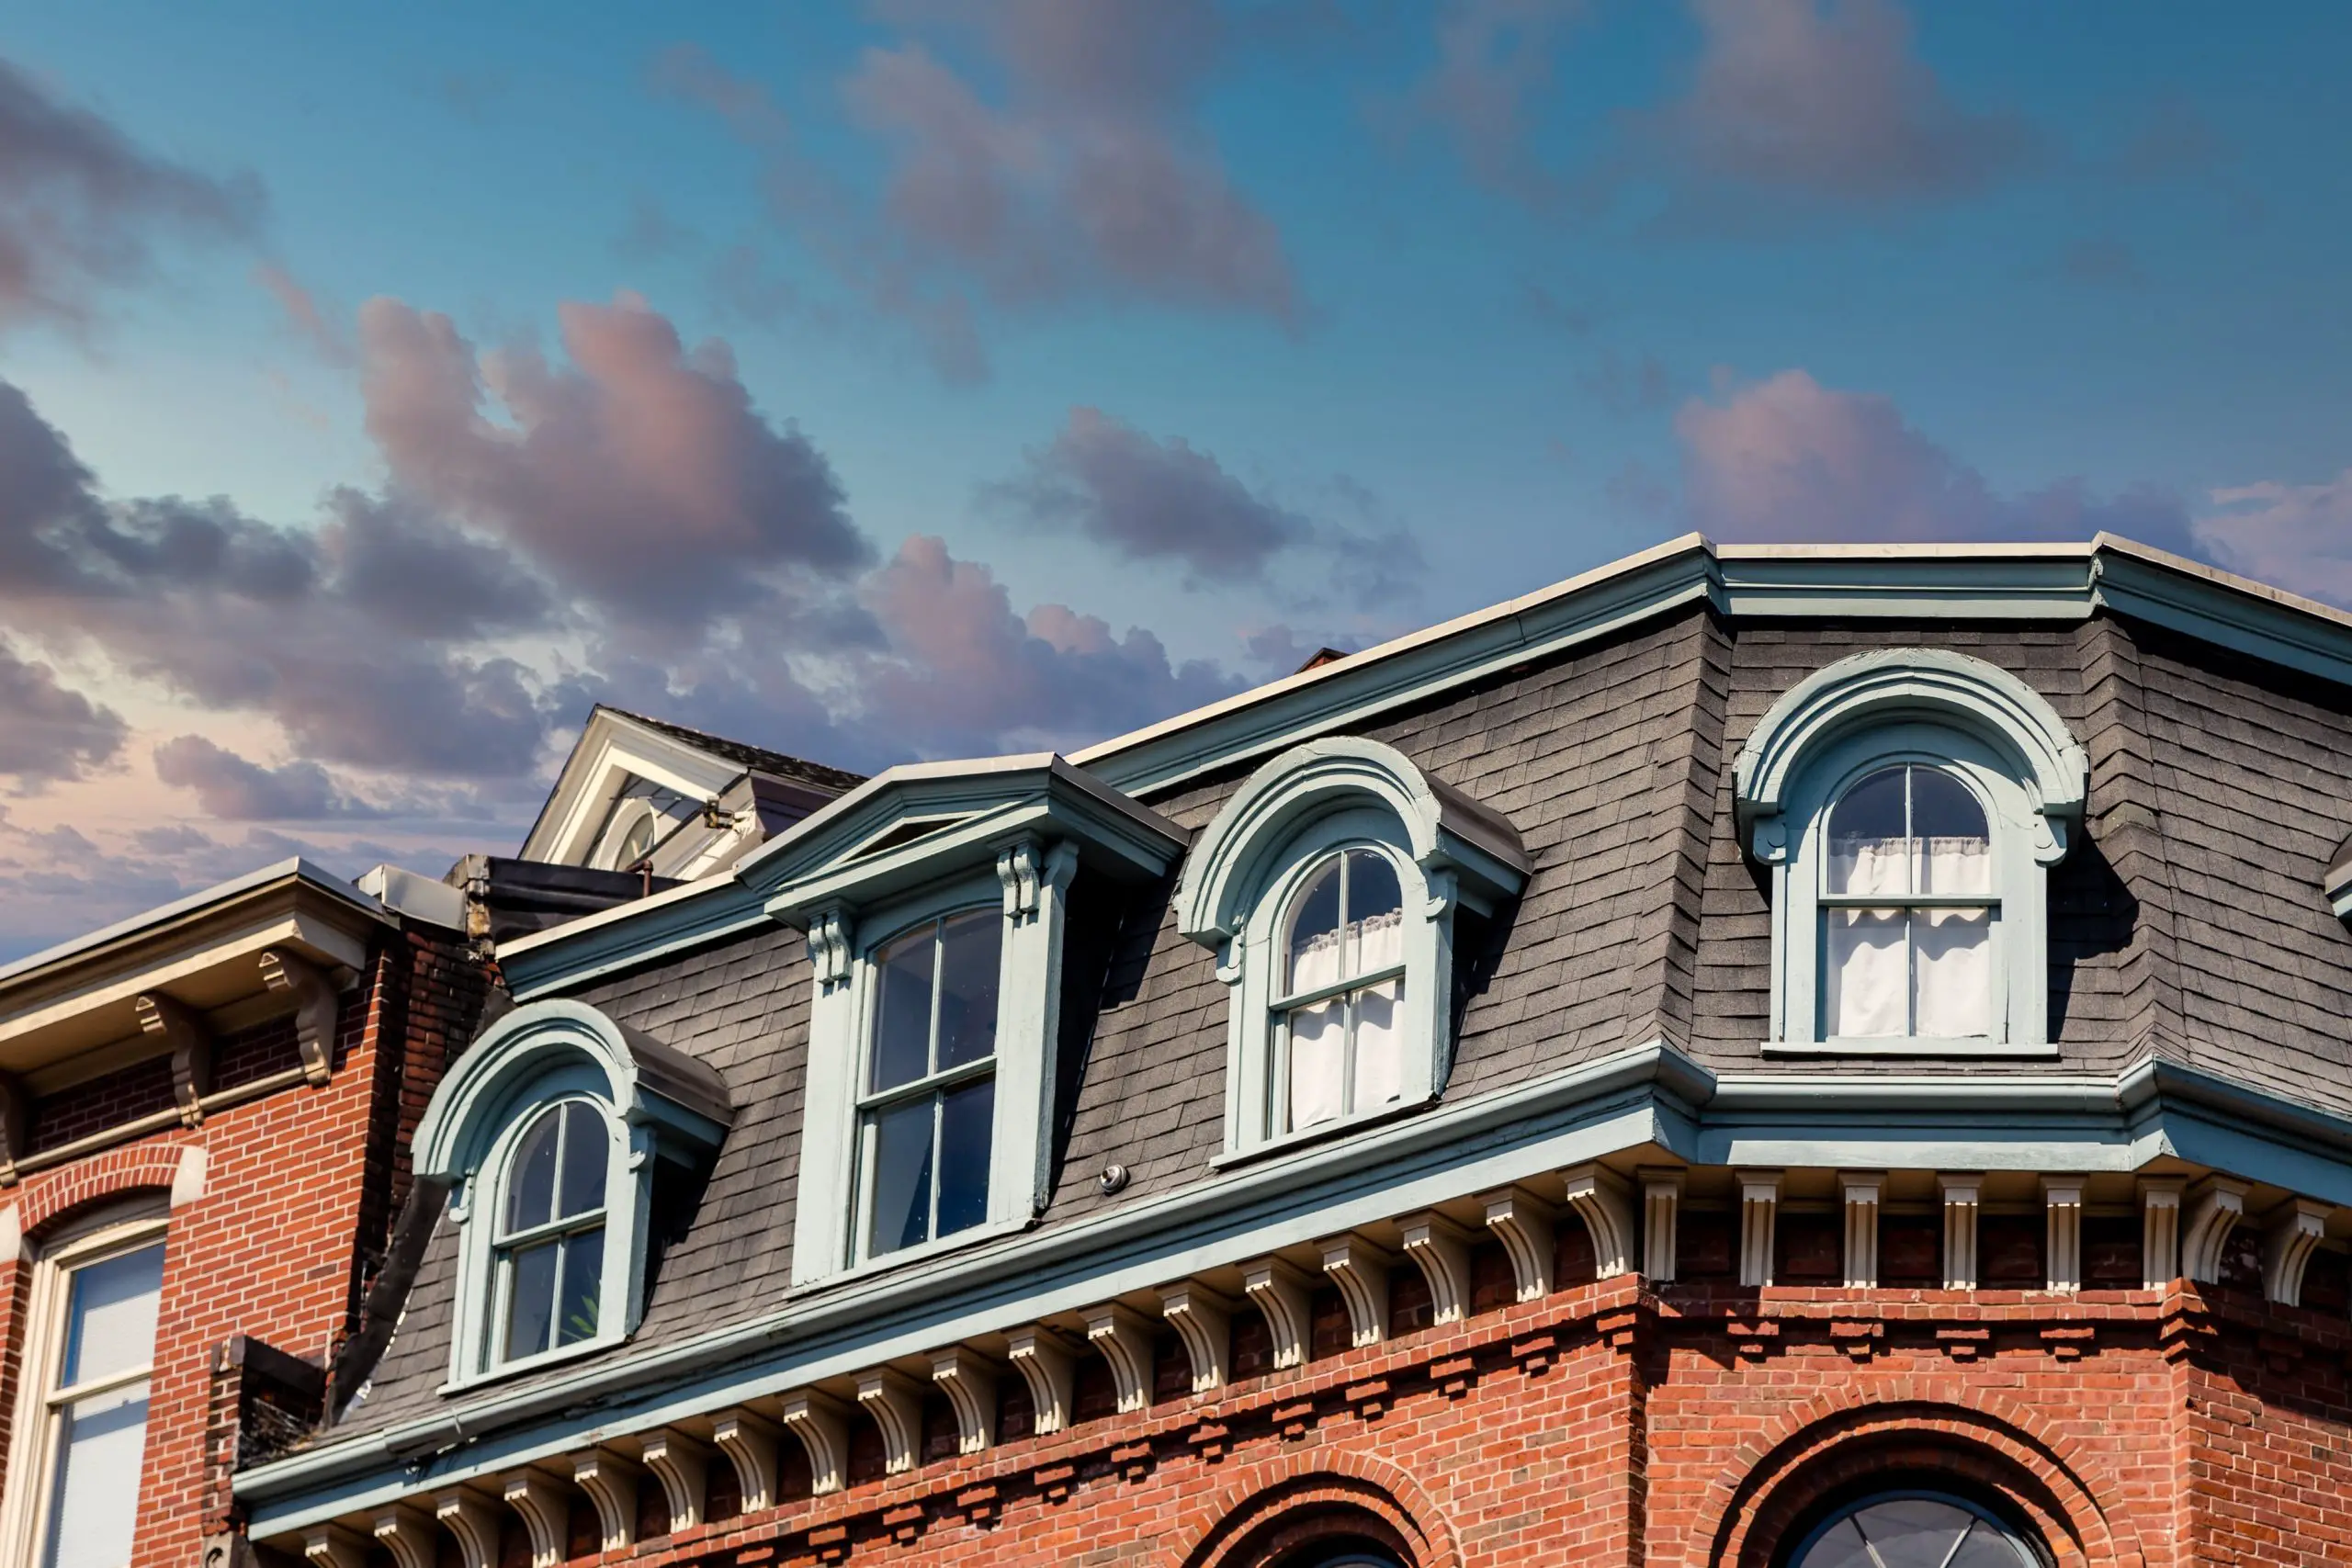 What Is a Mansard Roof?